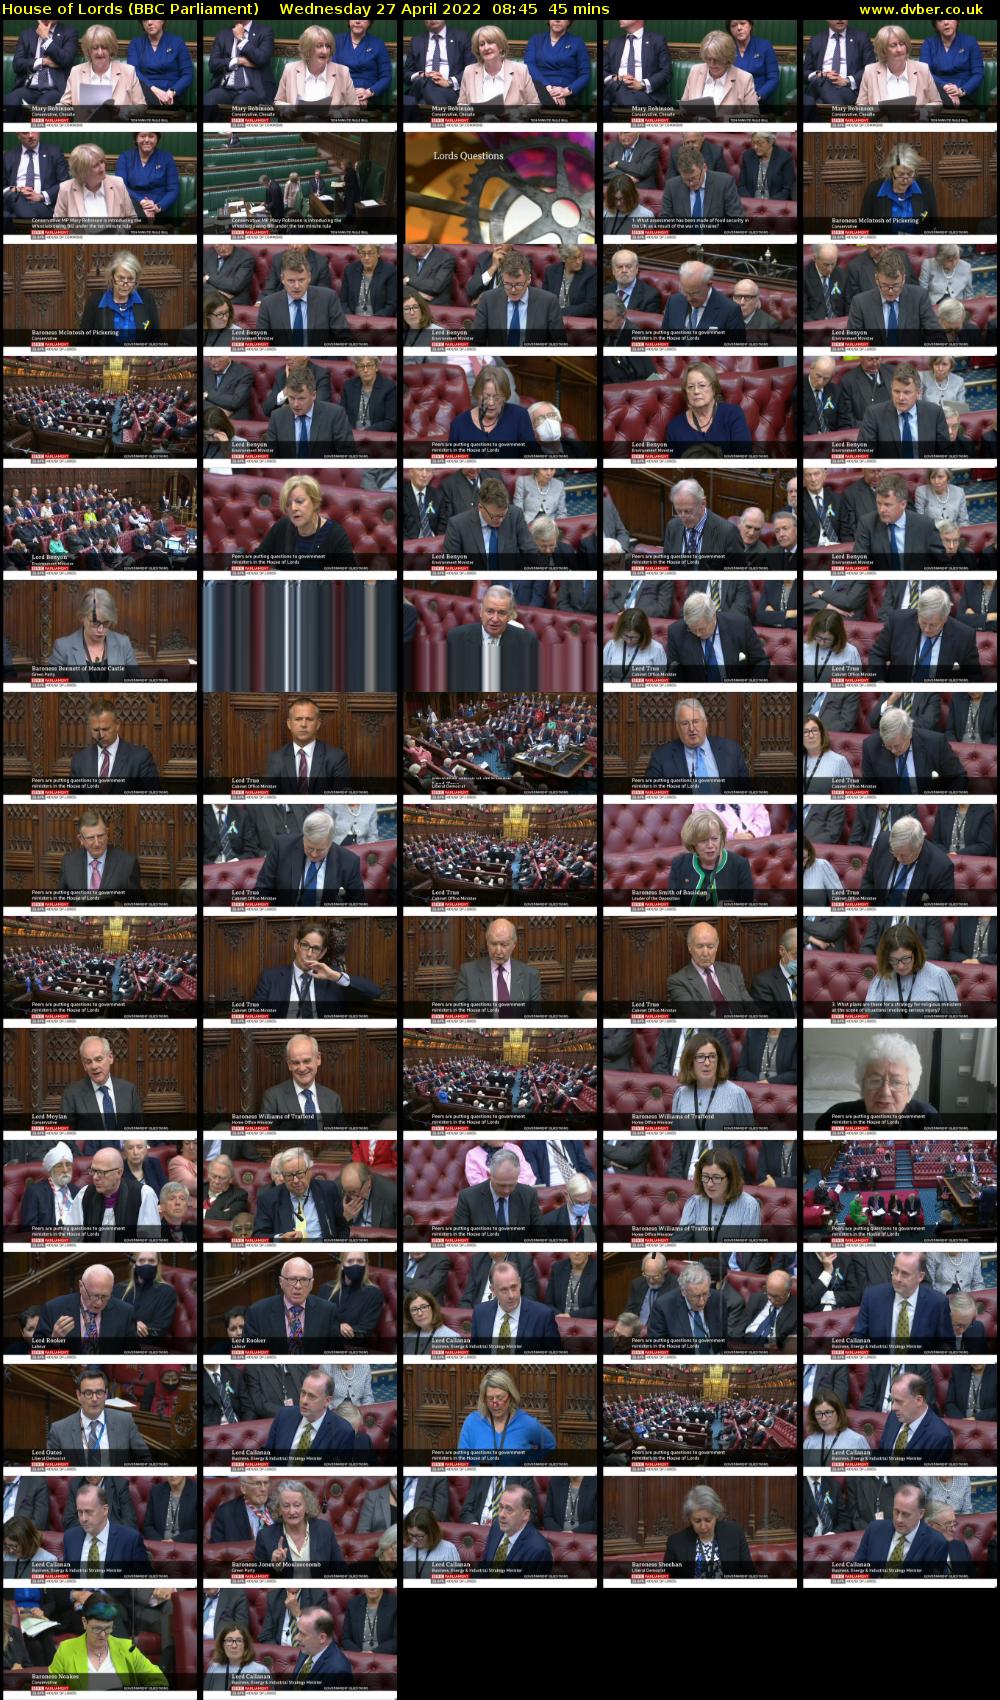 House of Lords (BBC Parliament) Wednesday 27 April 2022 08:45 - 09:30